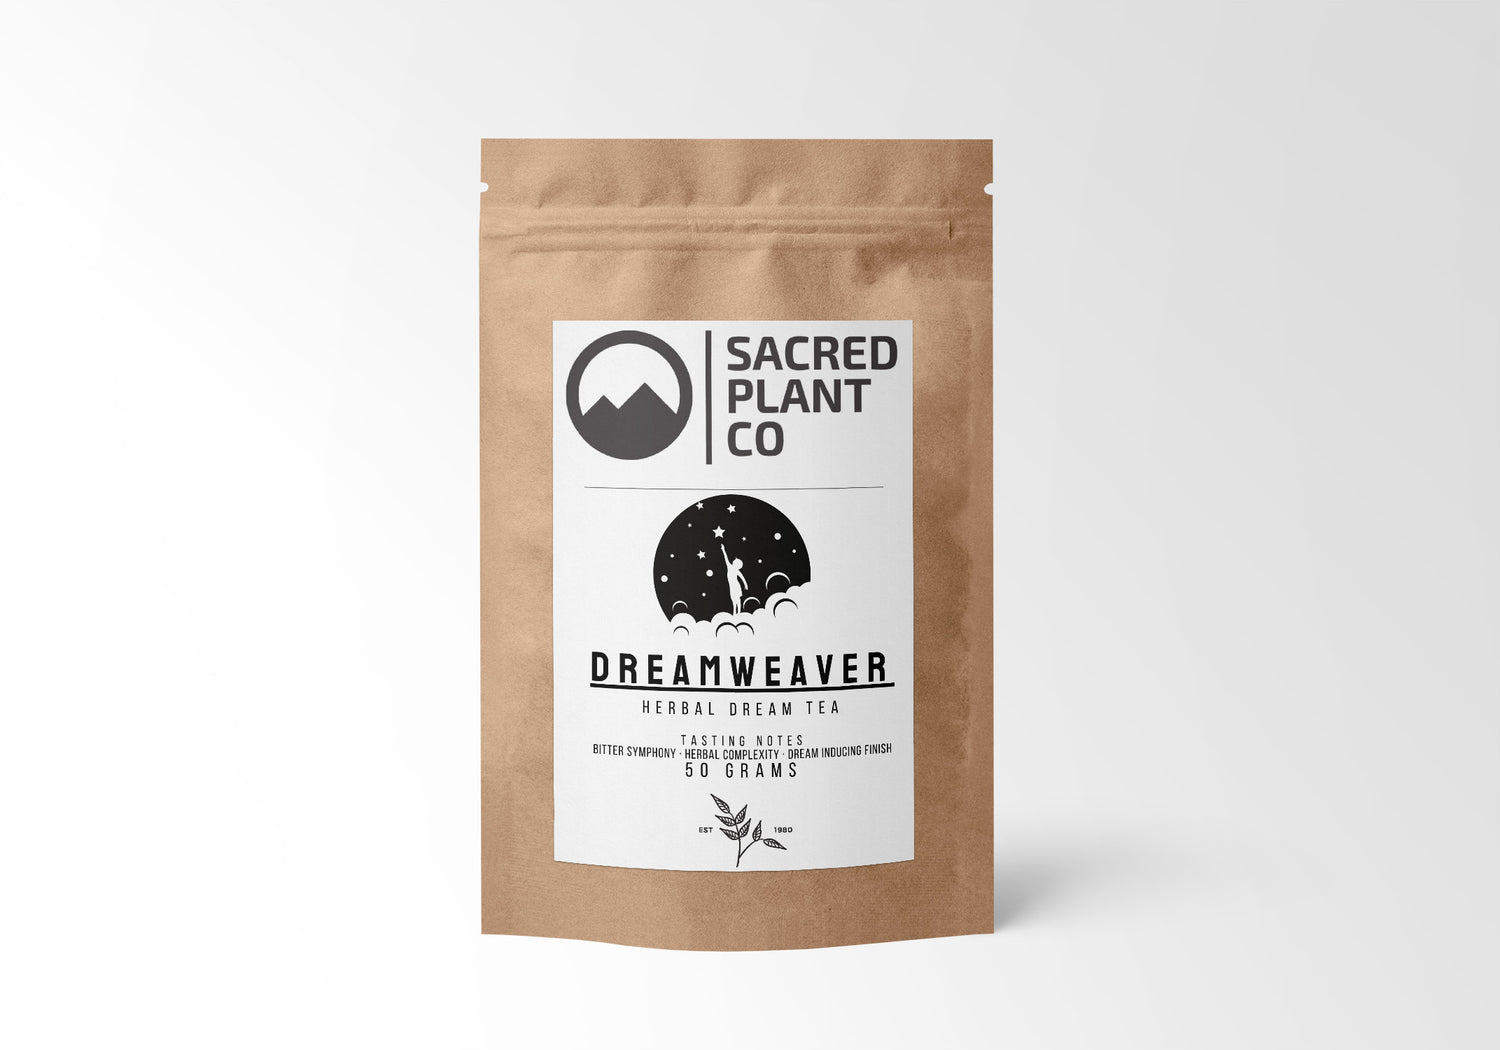 Dreamweaver Herbal Lucid Dream Tea packaging by Sacred Plant Co - Front label.